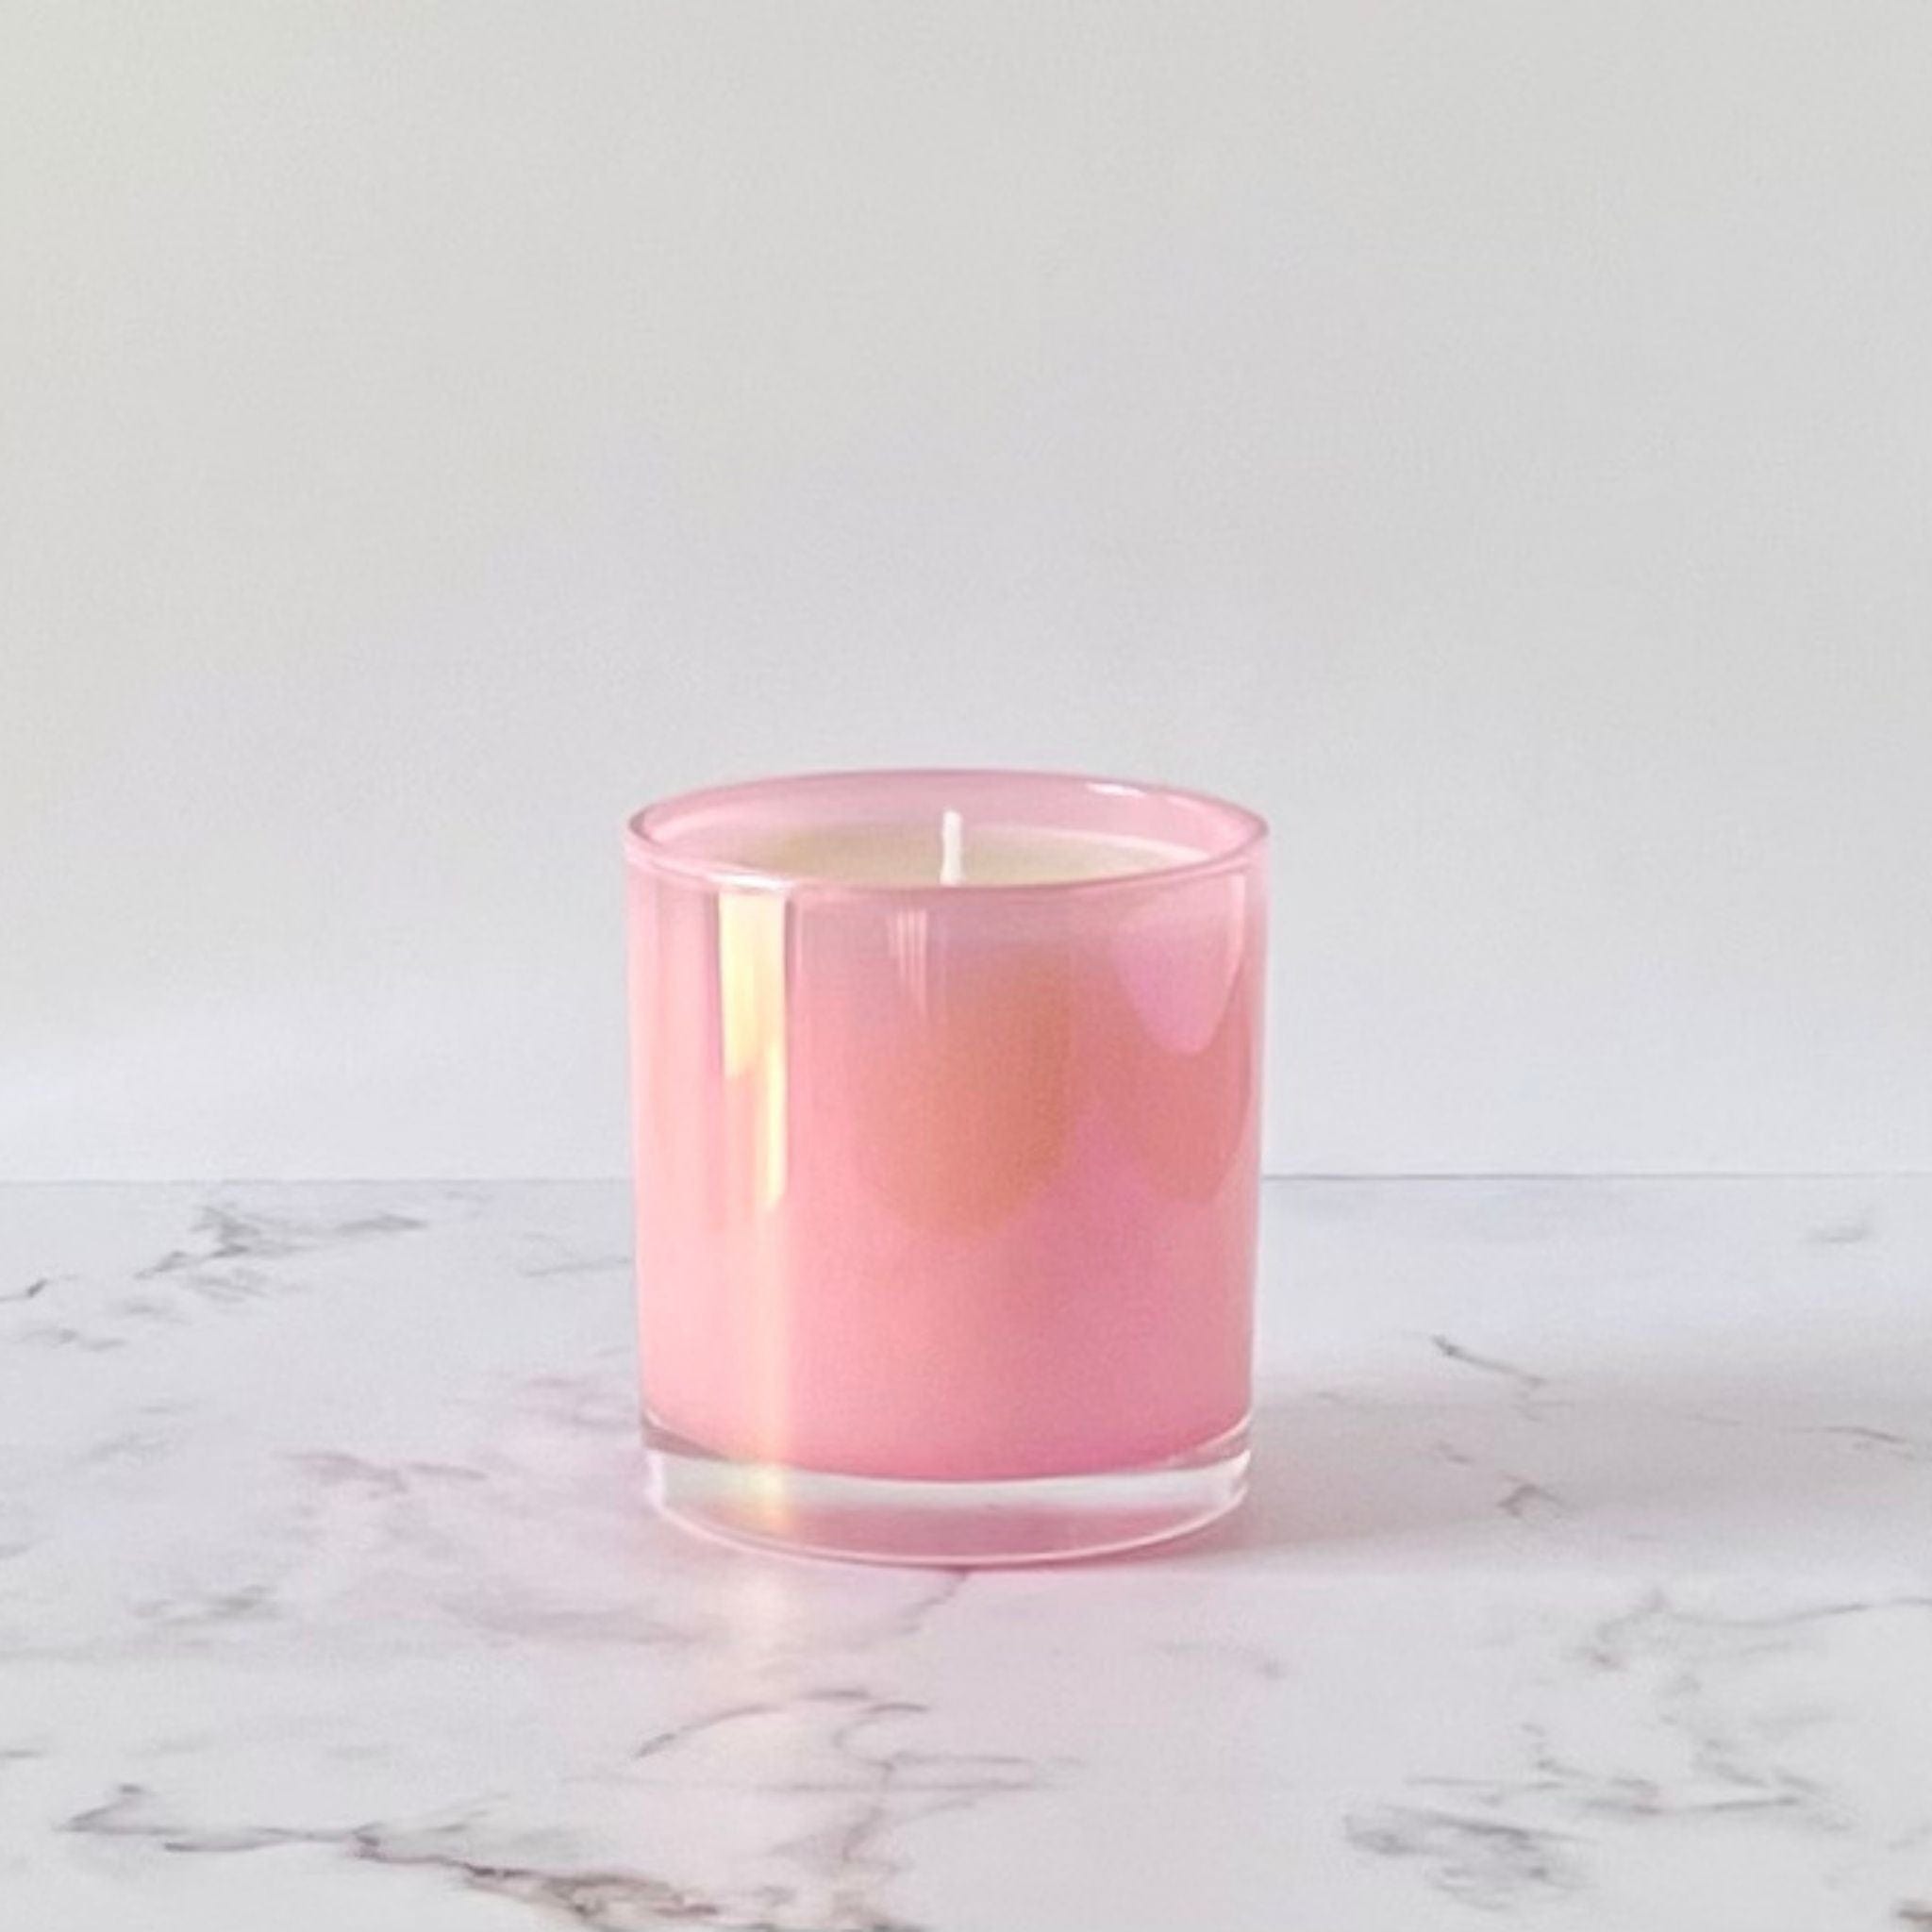 Private Label Candles by Velavida Candles 9 Oz Pink Iridescent Wholesale candles in bulk